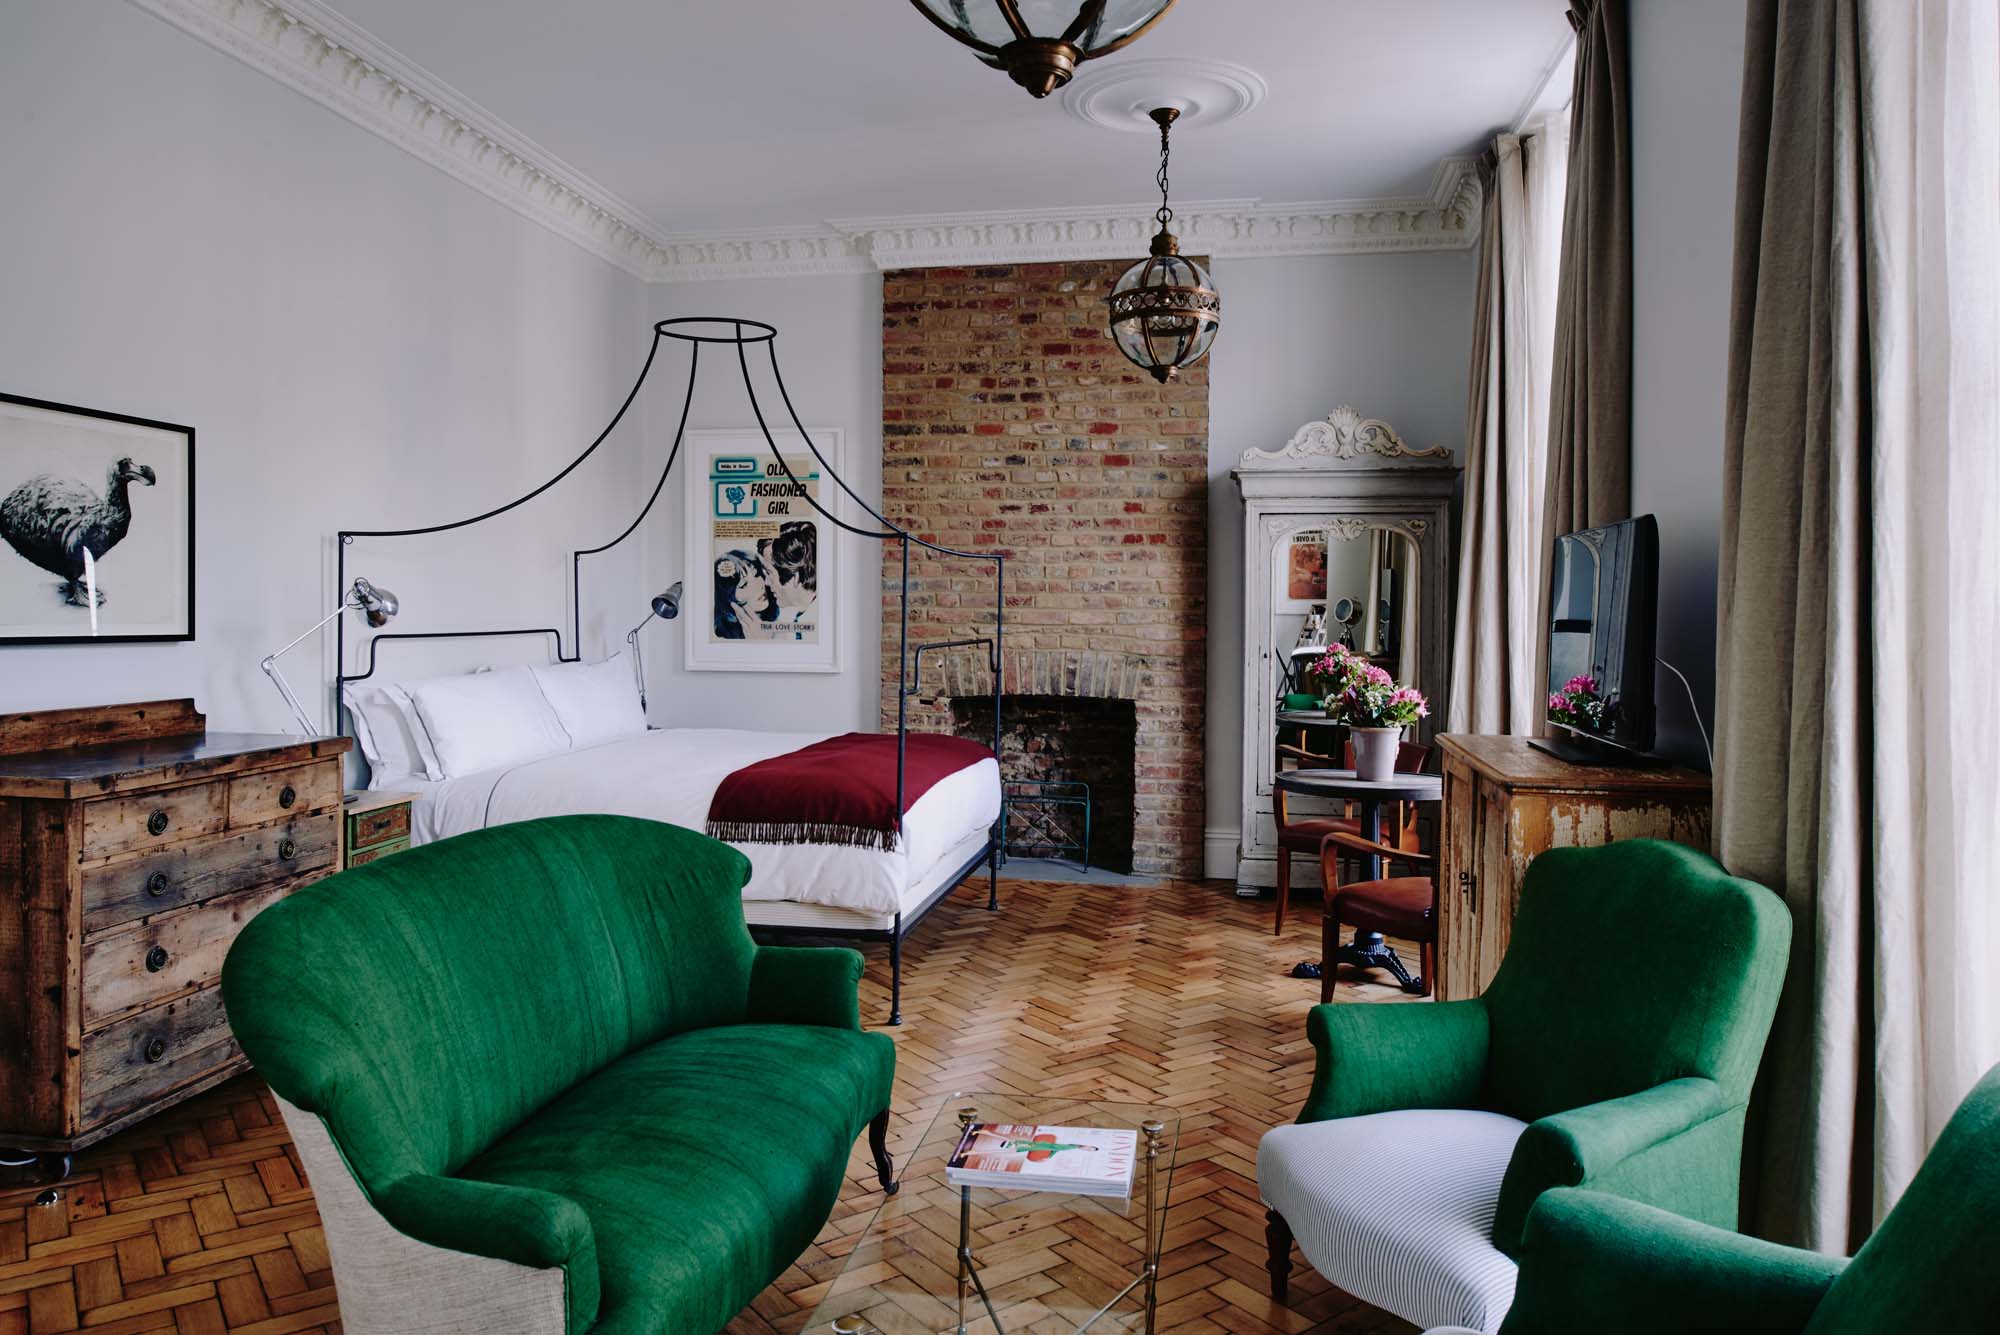 @artistresidence - officially the UK's most Instagrammable hotels